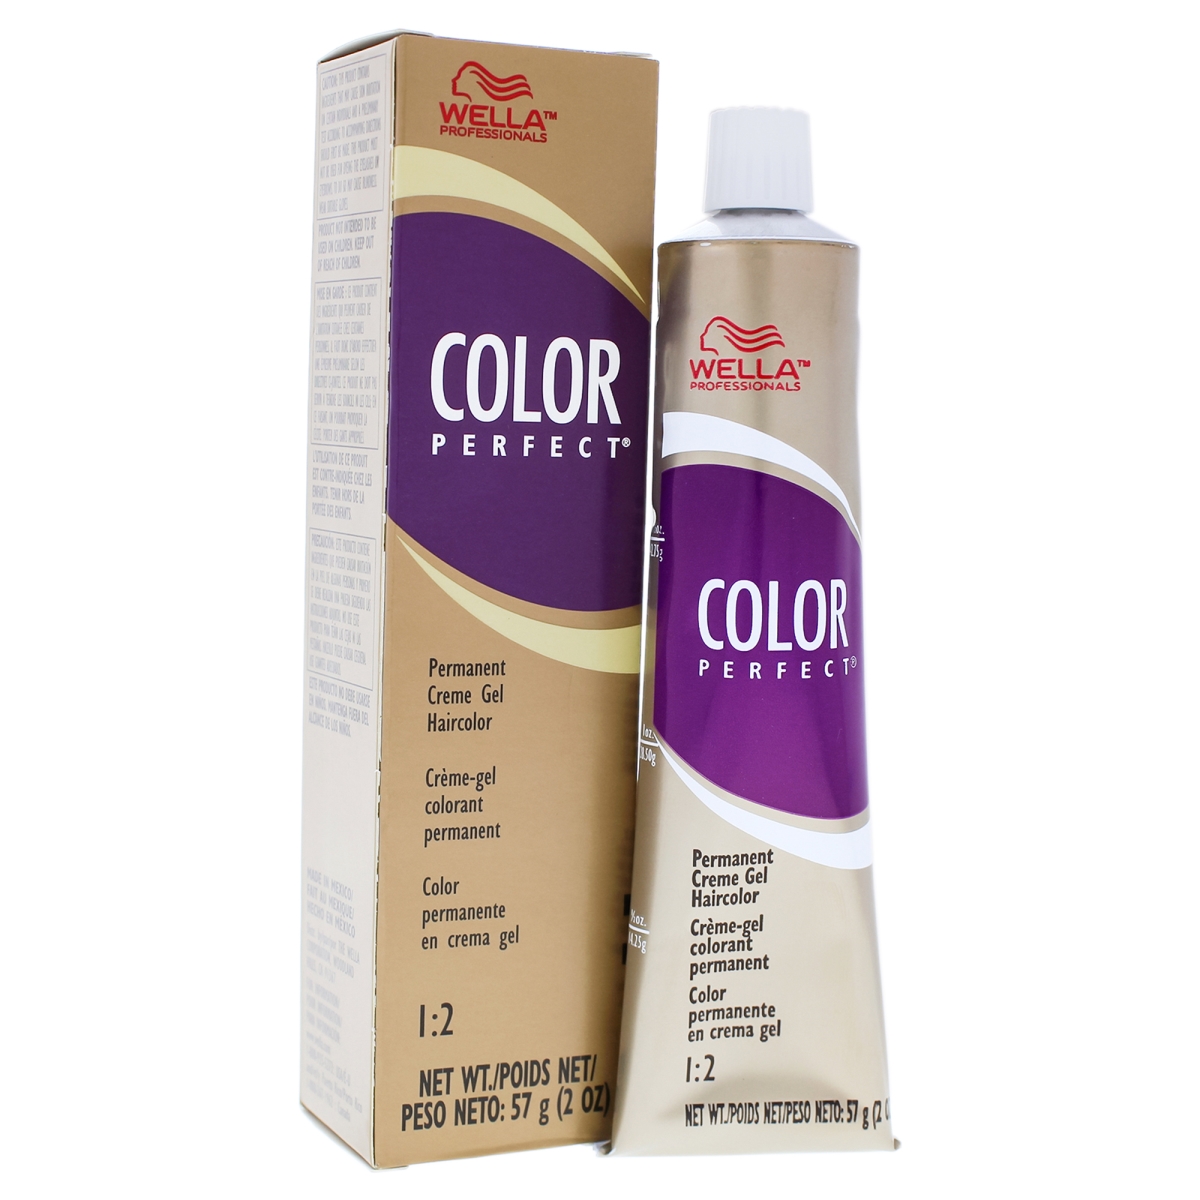 I0086464 Color Perfect Permanent Creme Hair Color For Unisex - 3 46 Dark Red Violet Brown - 2 Oz